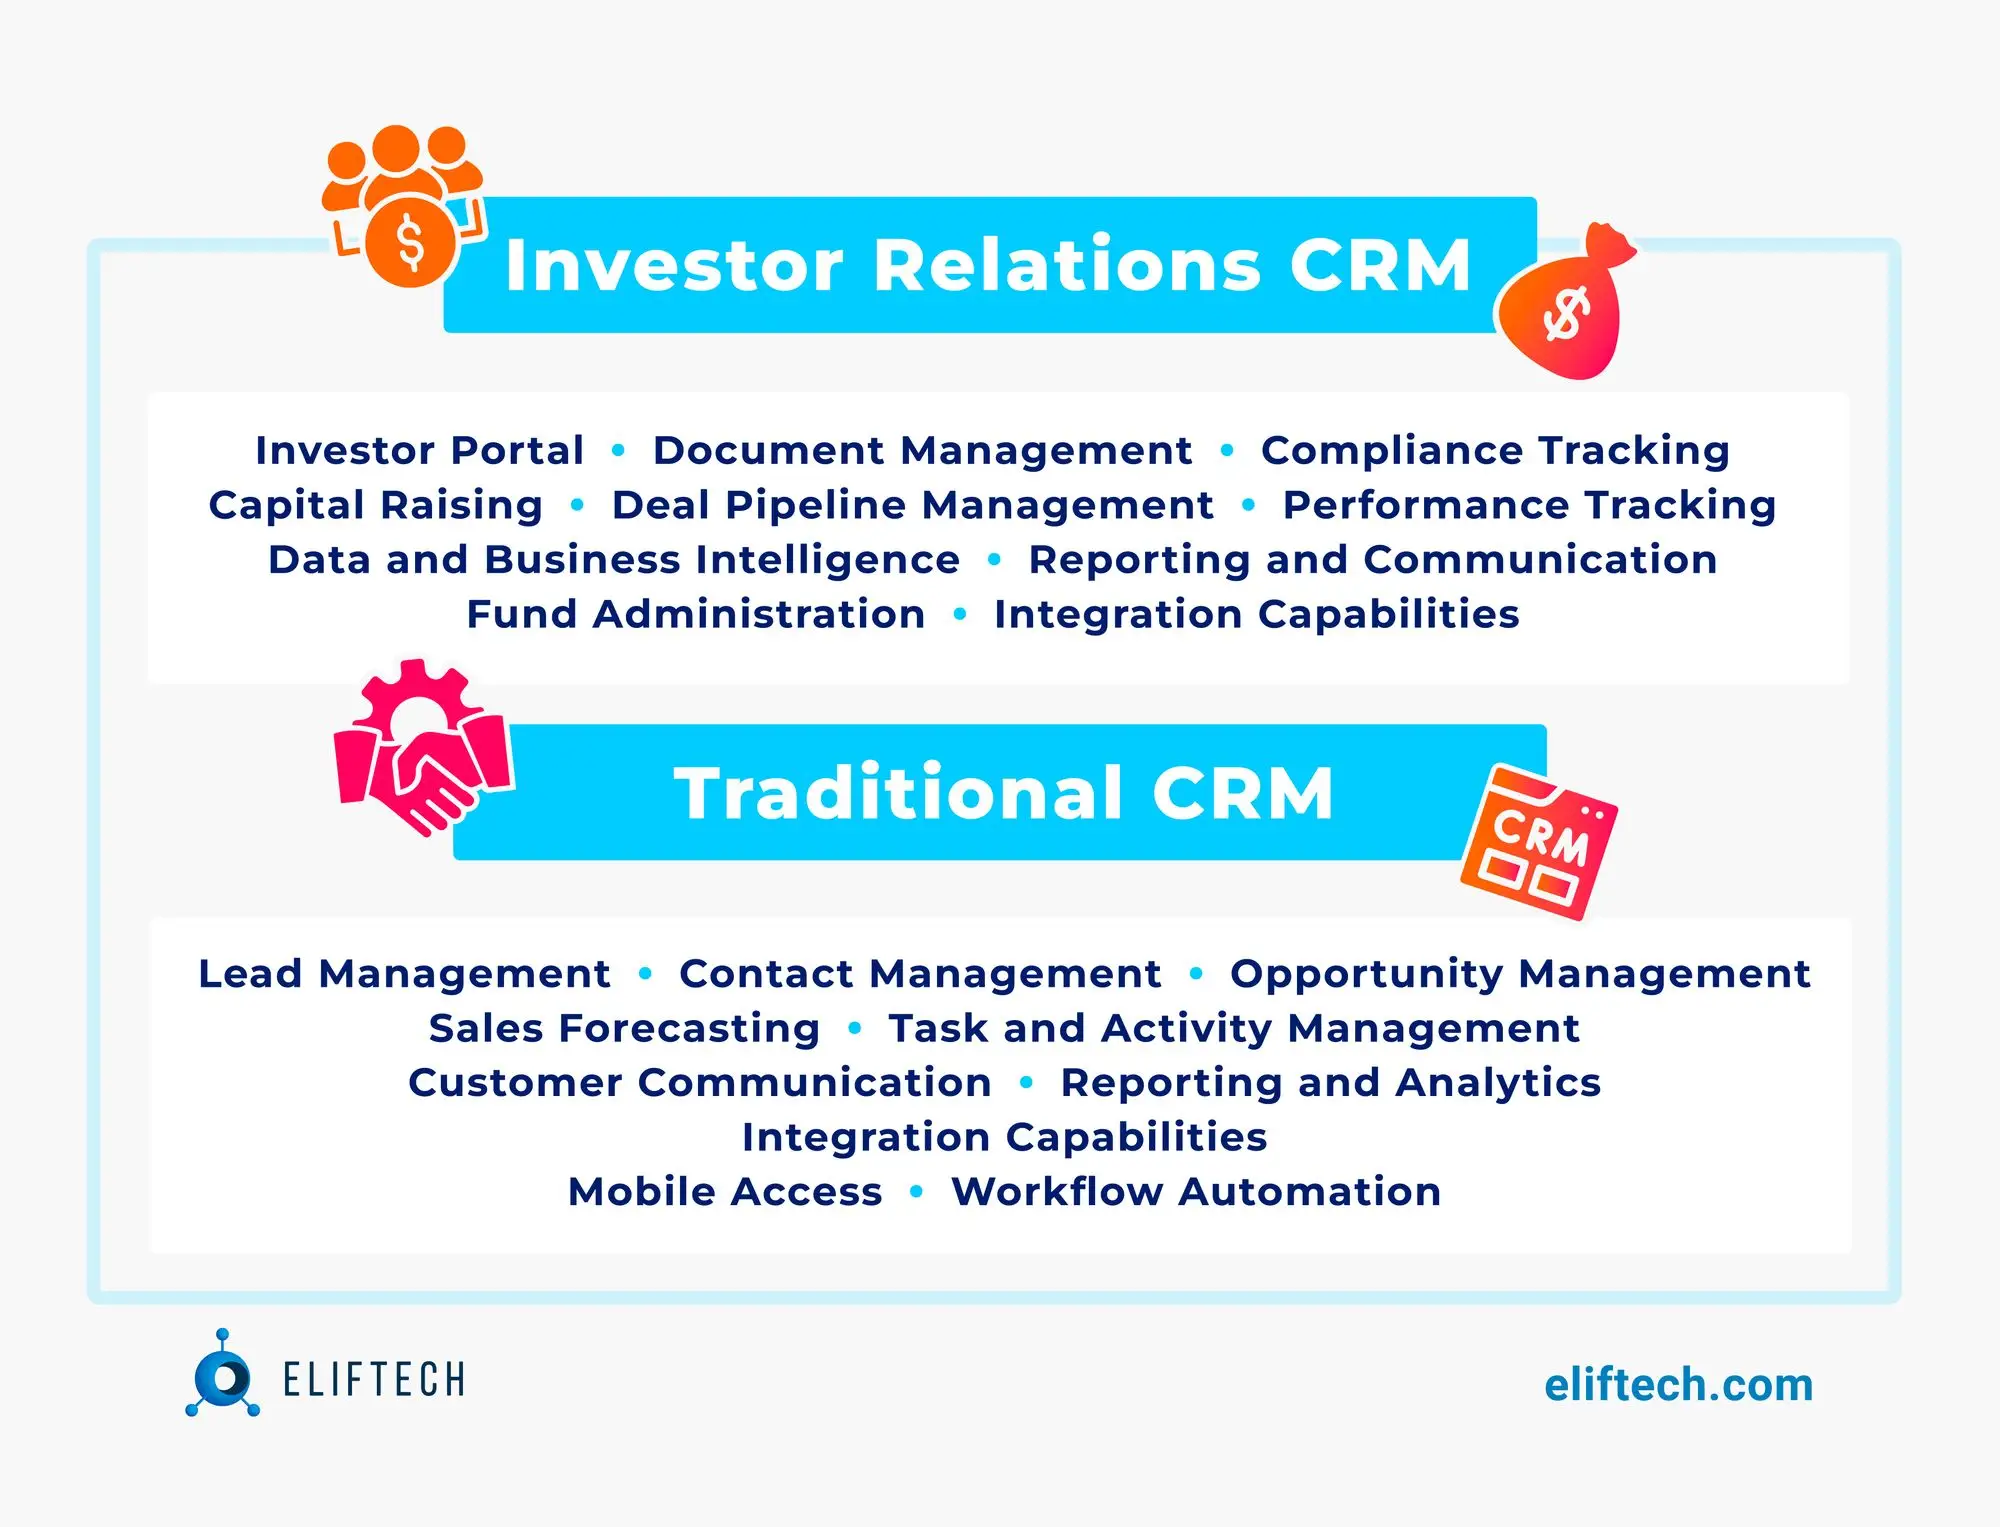 Specific Functionalities for Investor Management in an Investor Relations CRM